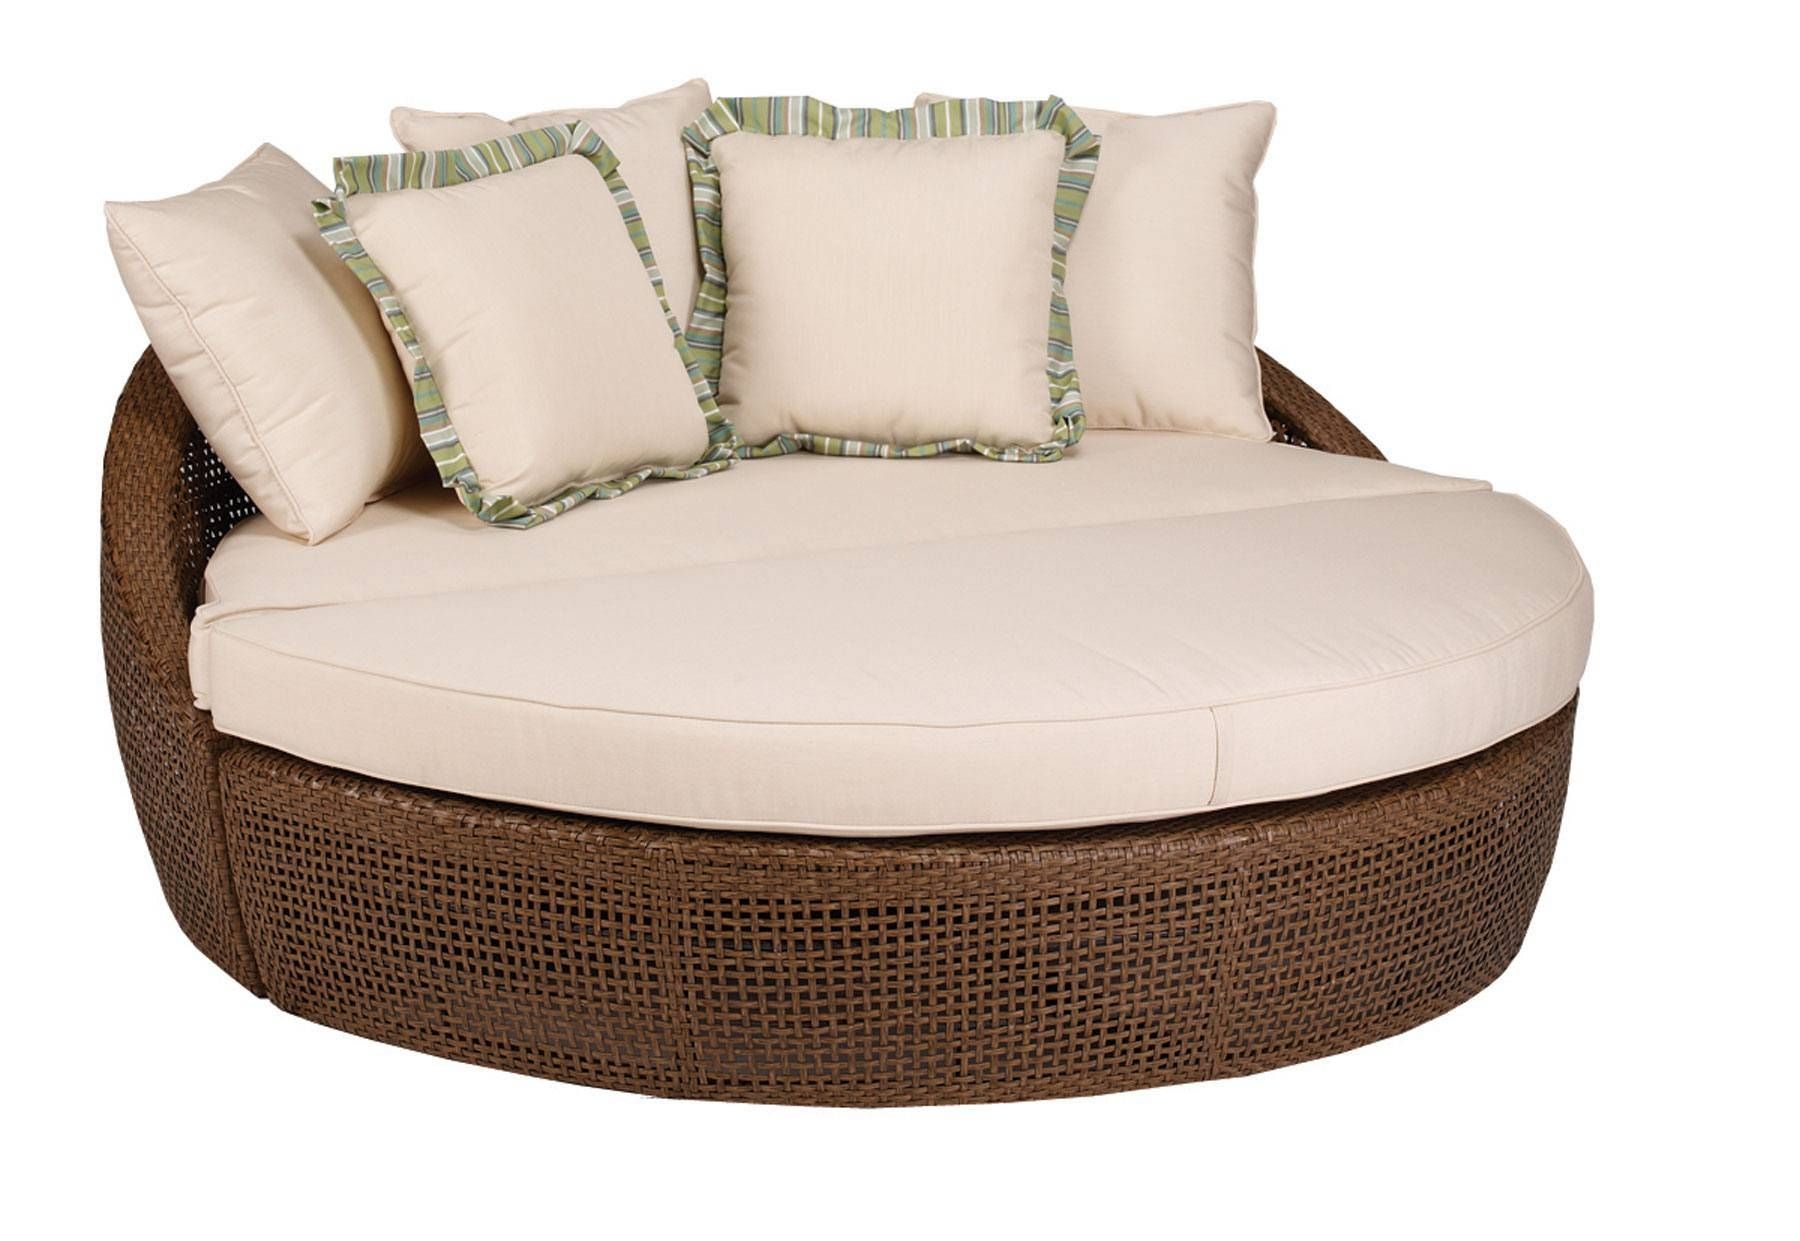 Best Chaise Lounge Sofa | Design Ideas & Decors Within Sofa Lounge Chairs (View 3 of 30)